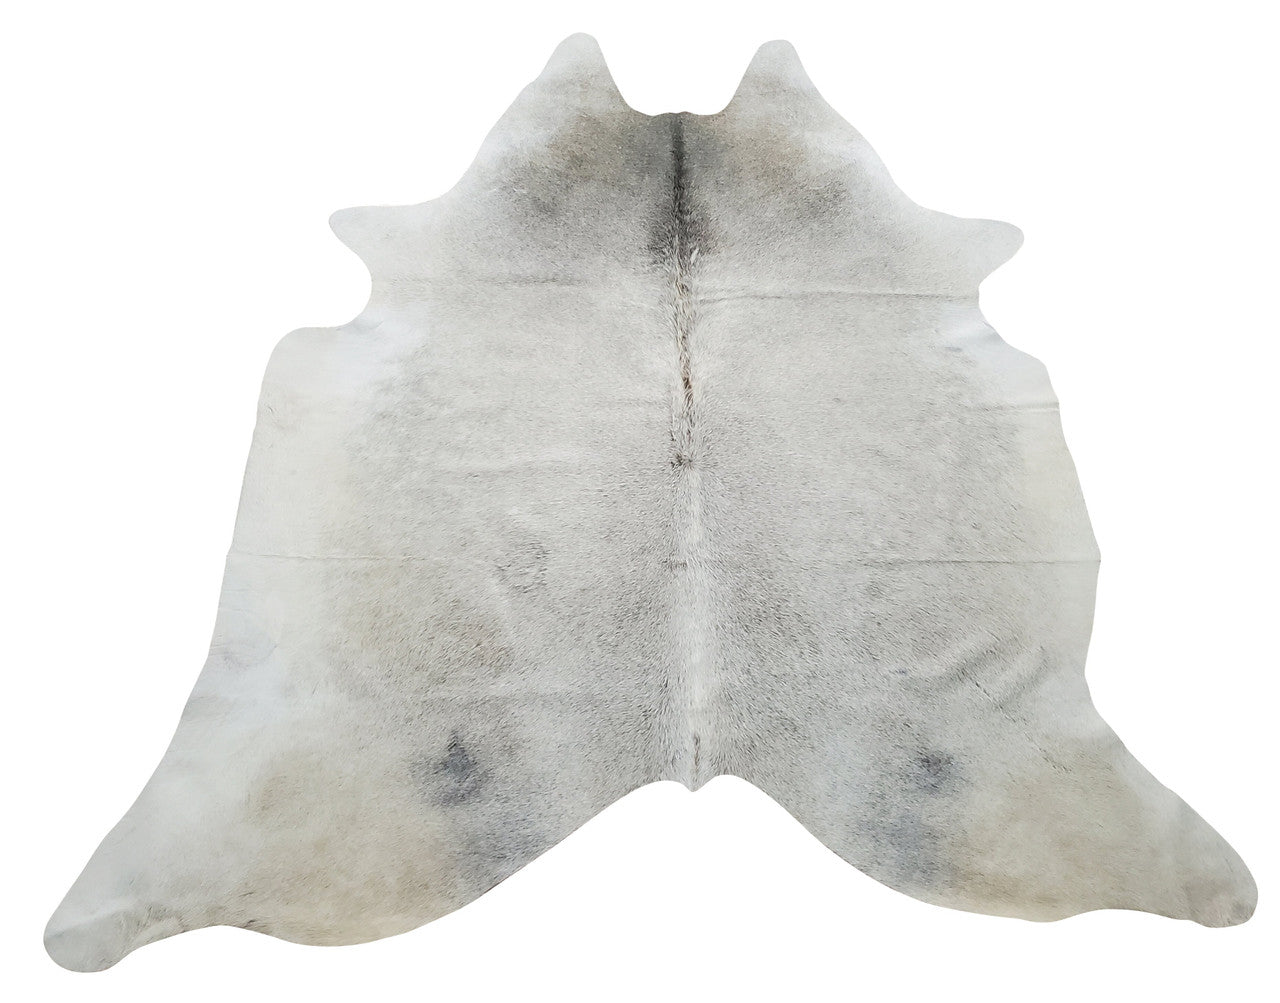 If you want a nice present this Christmas a natural grey cowhide rug is the best option, it is real, soft and smooth and works great for upholstery. 